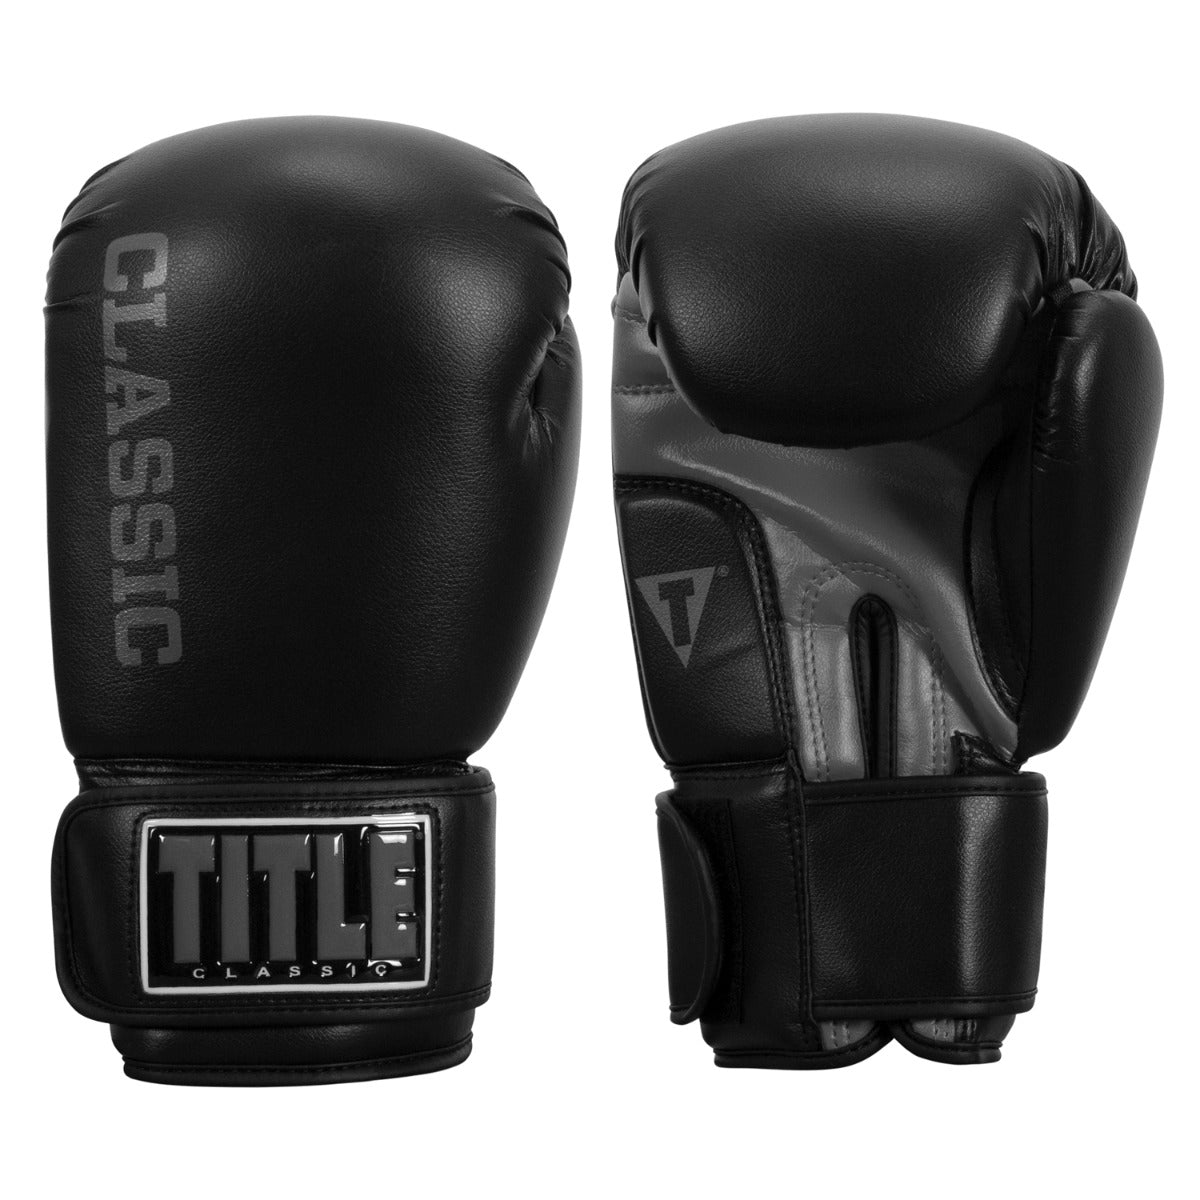 TITLE Classic Contend Boxing Gloves